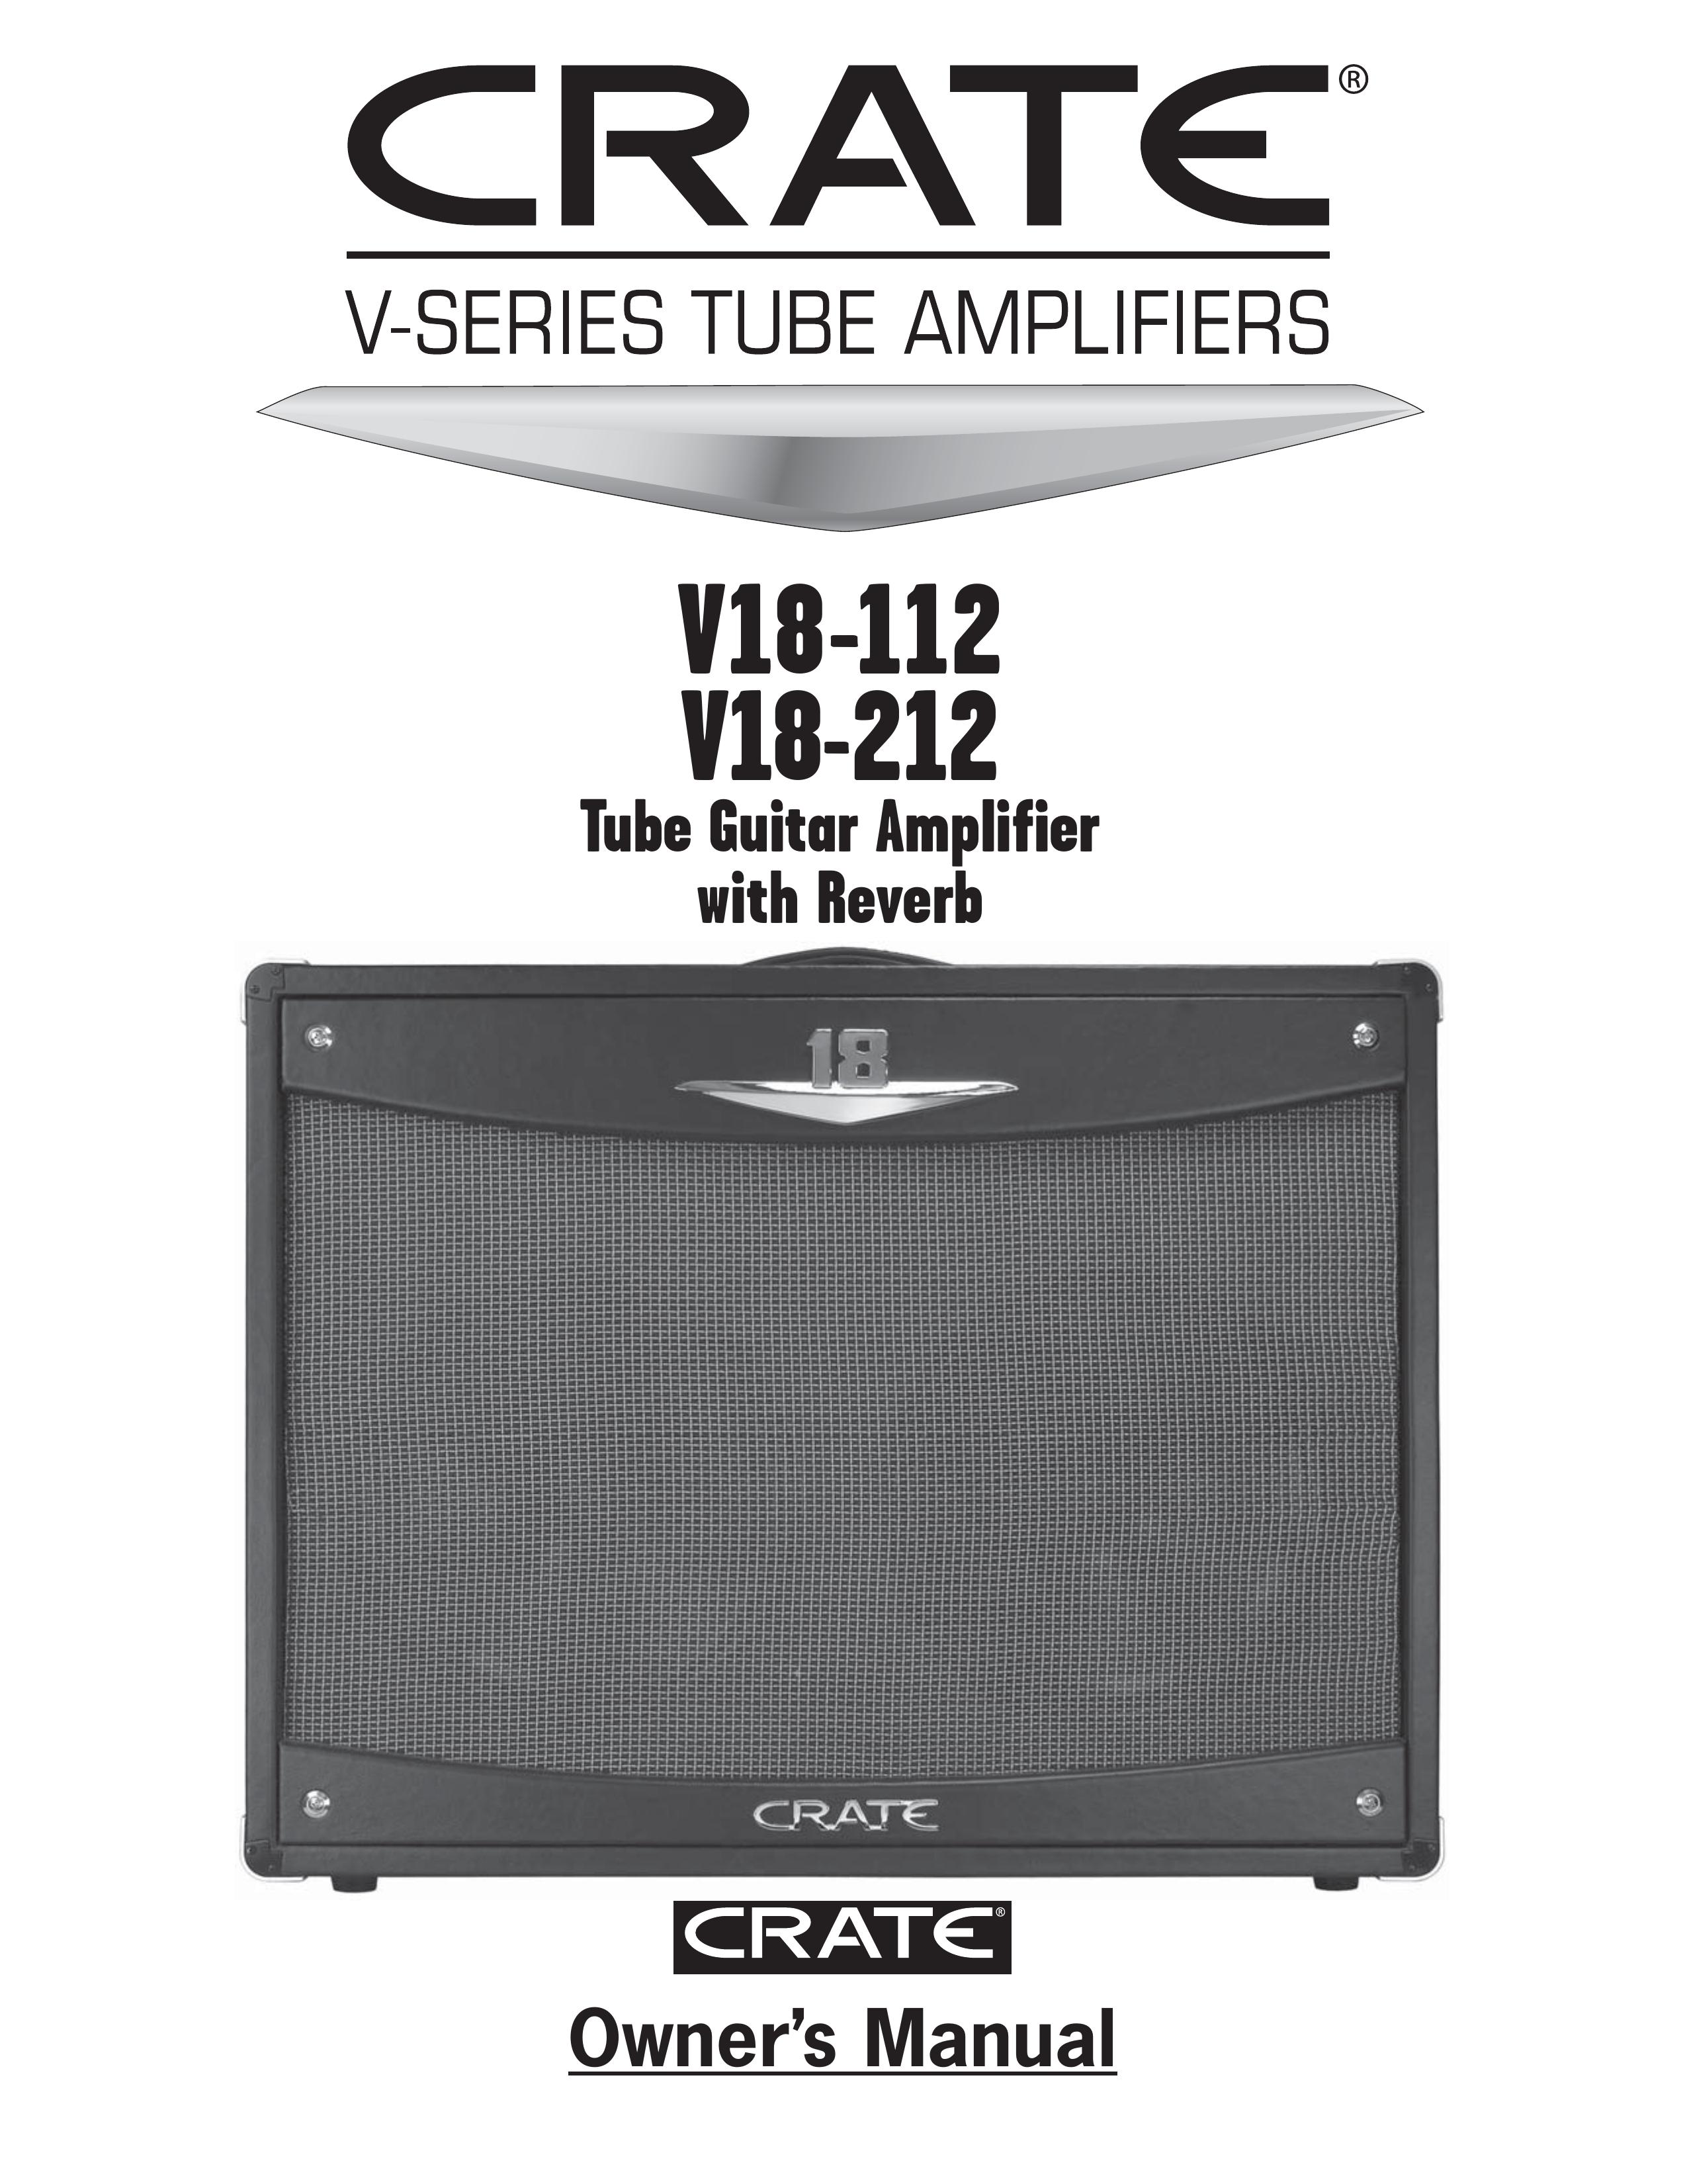 Crate Amplifiers V18-112 Musical Instrument User Manual